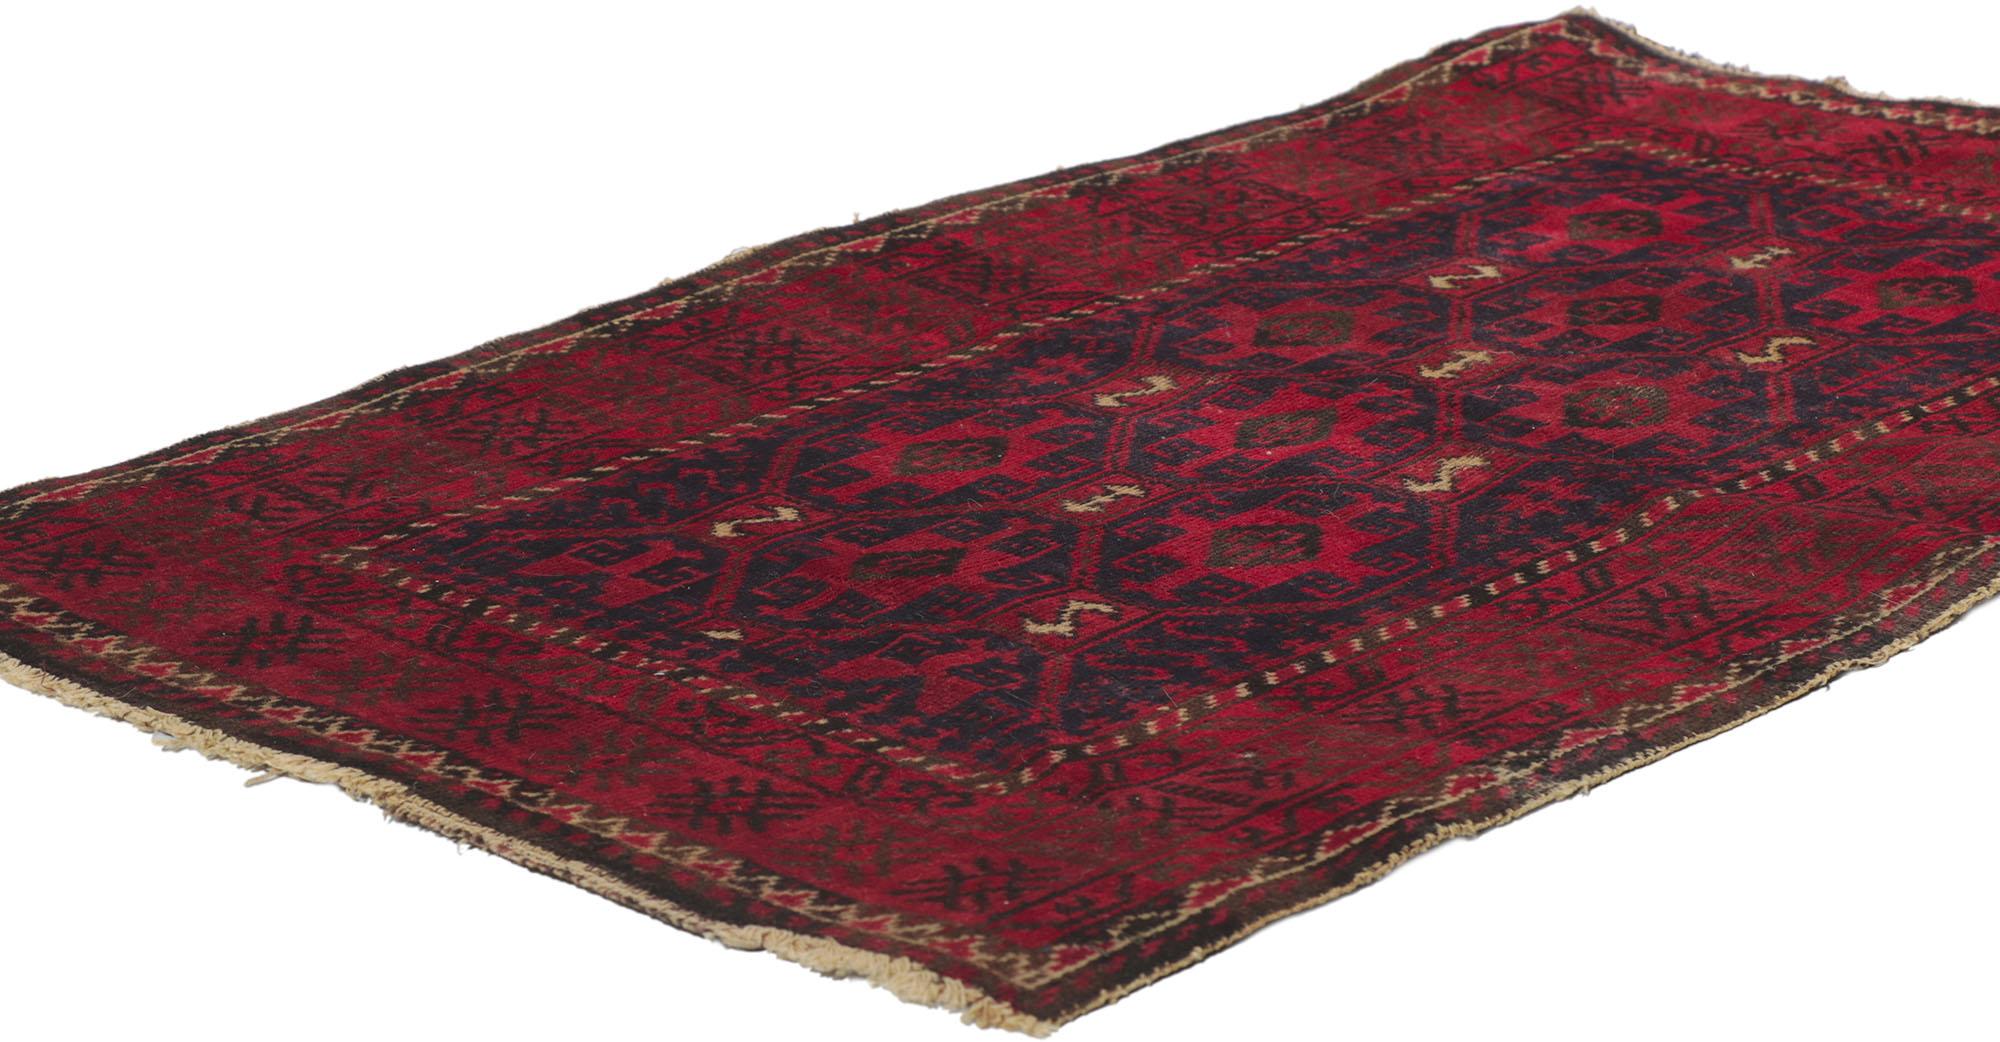 78216 Vintage Persian Turkoman rug, 02'01 x 03'06. Abrash. Desirable Age Wear. Made in Iran. Hand-knotted wool.